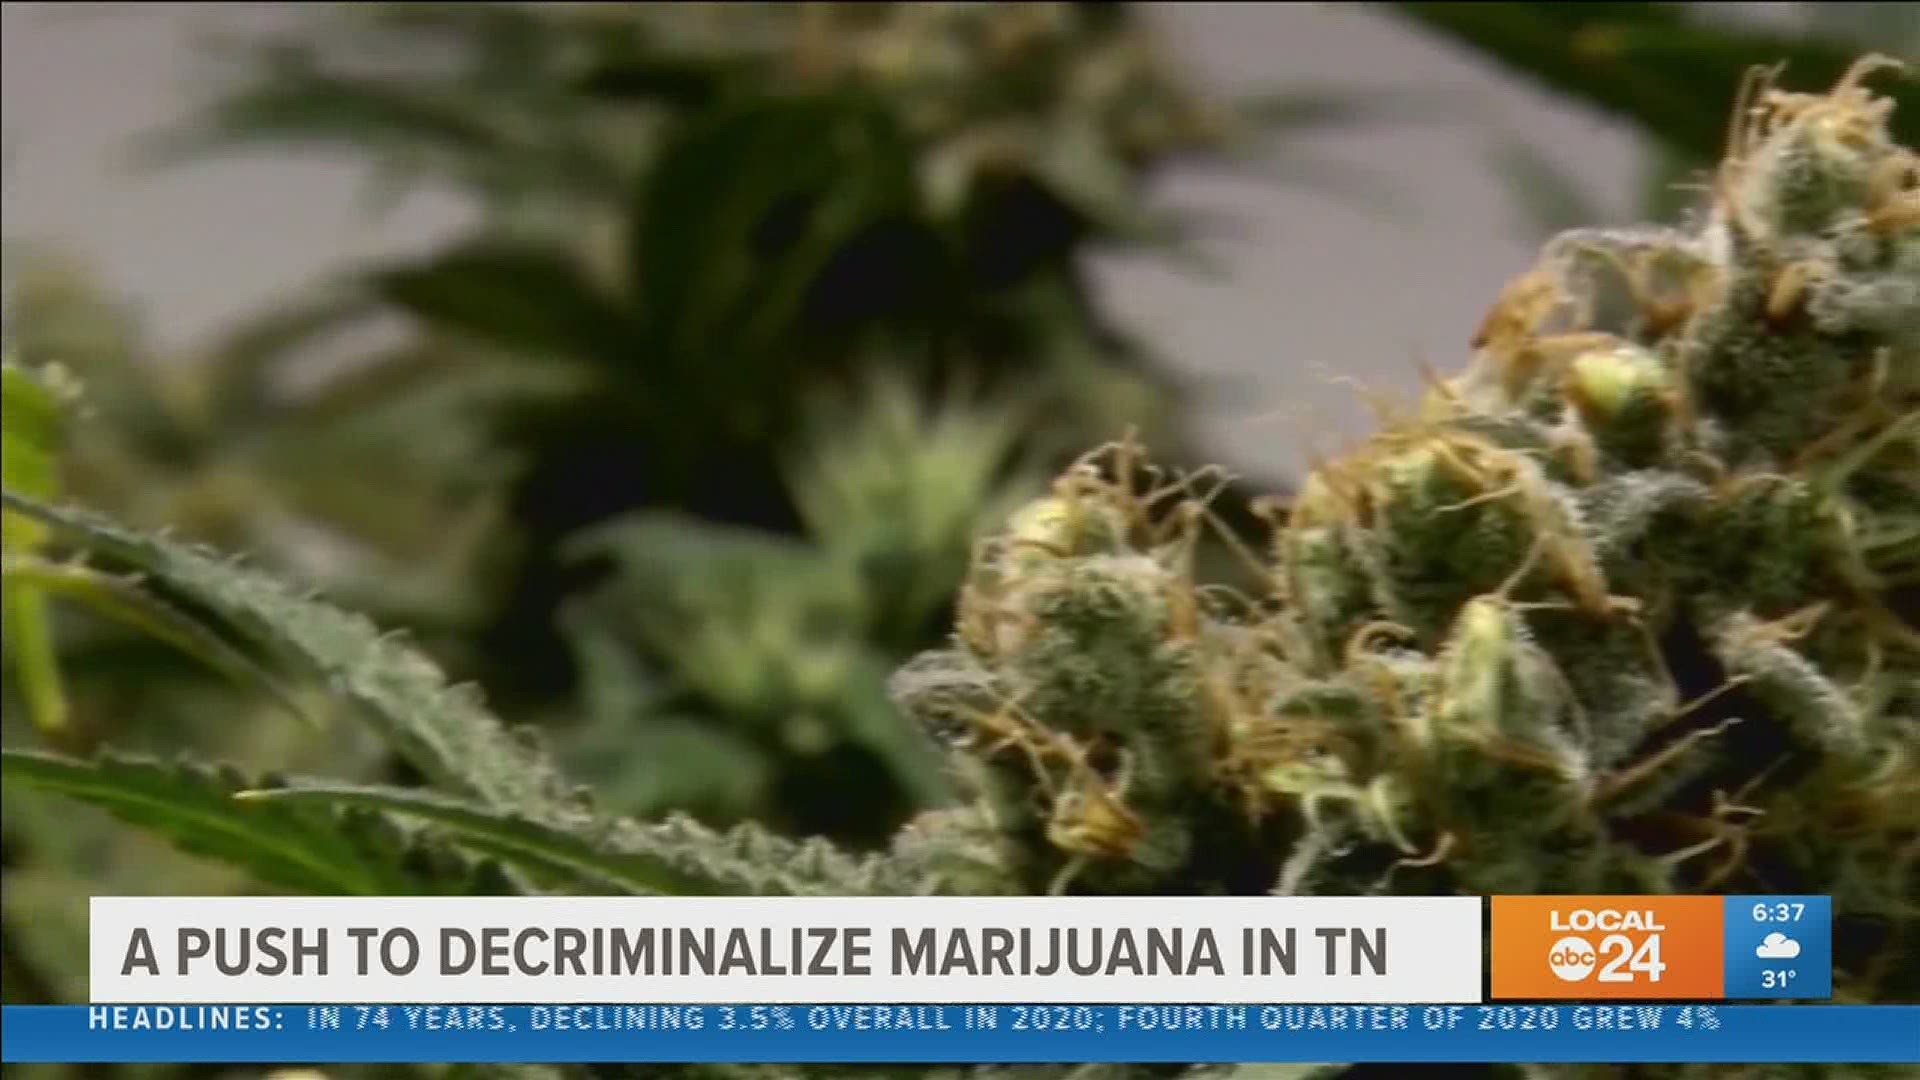 Tennessee is one of six states where marijuana is considered fully illegal.